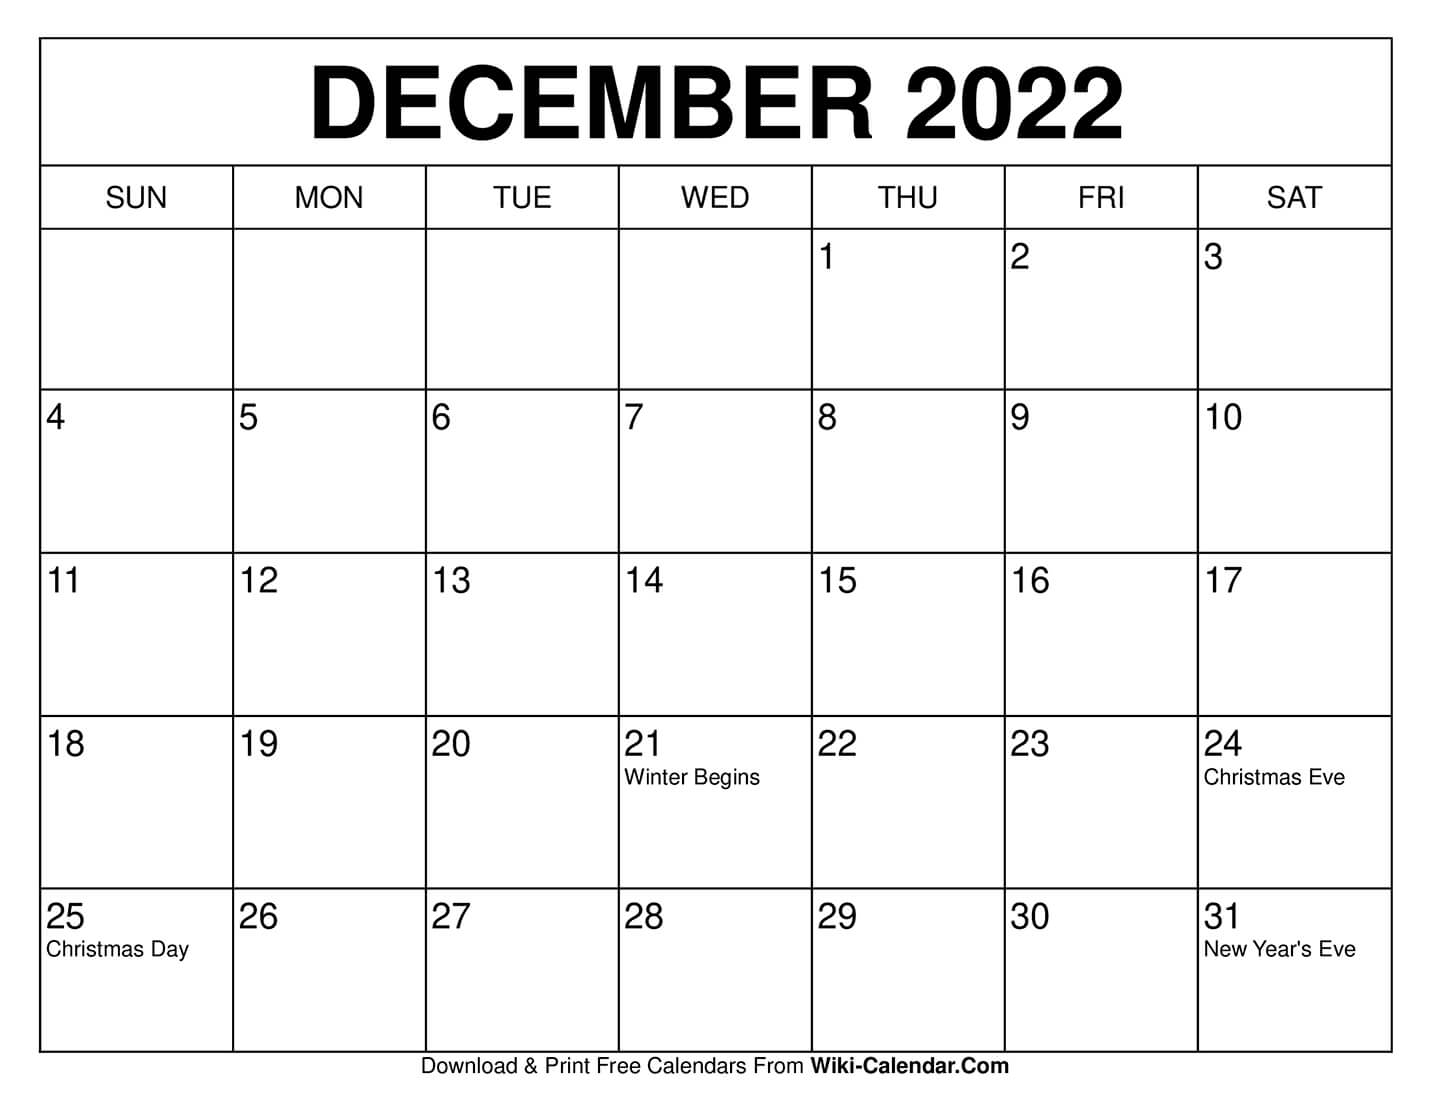 december-2021-calendar-printable-wiki-that-way-you-can-mix-and-match